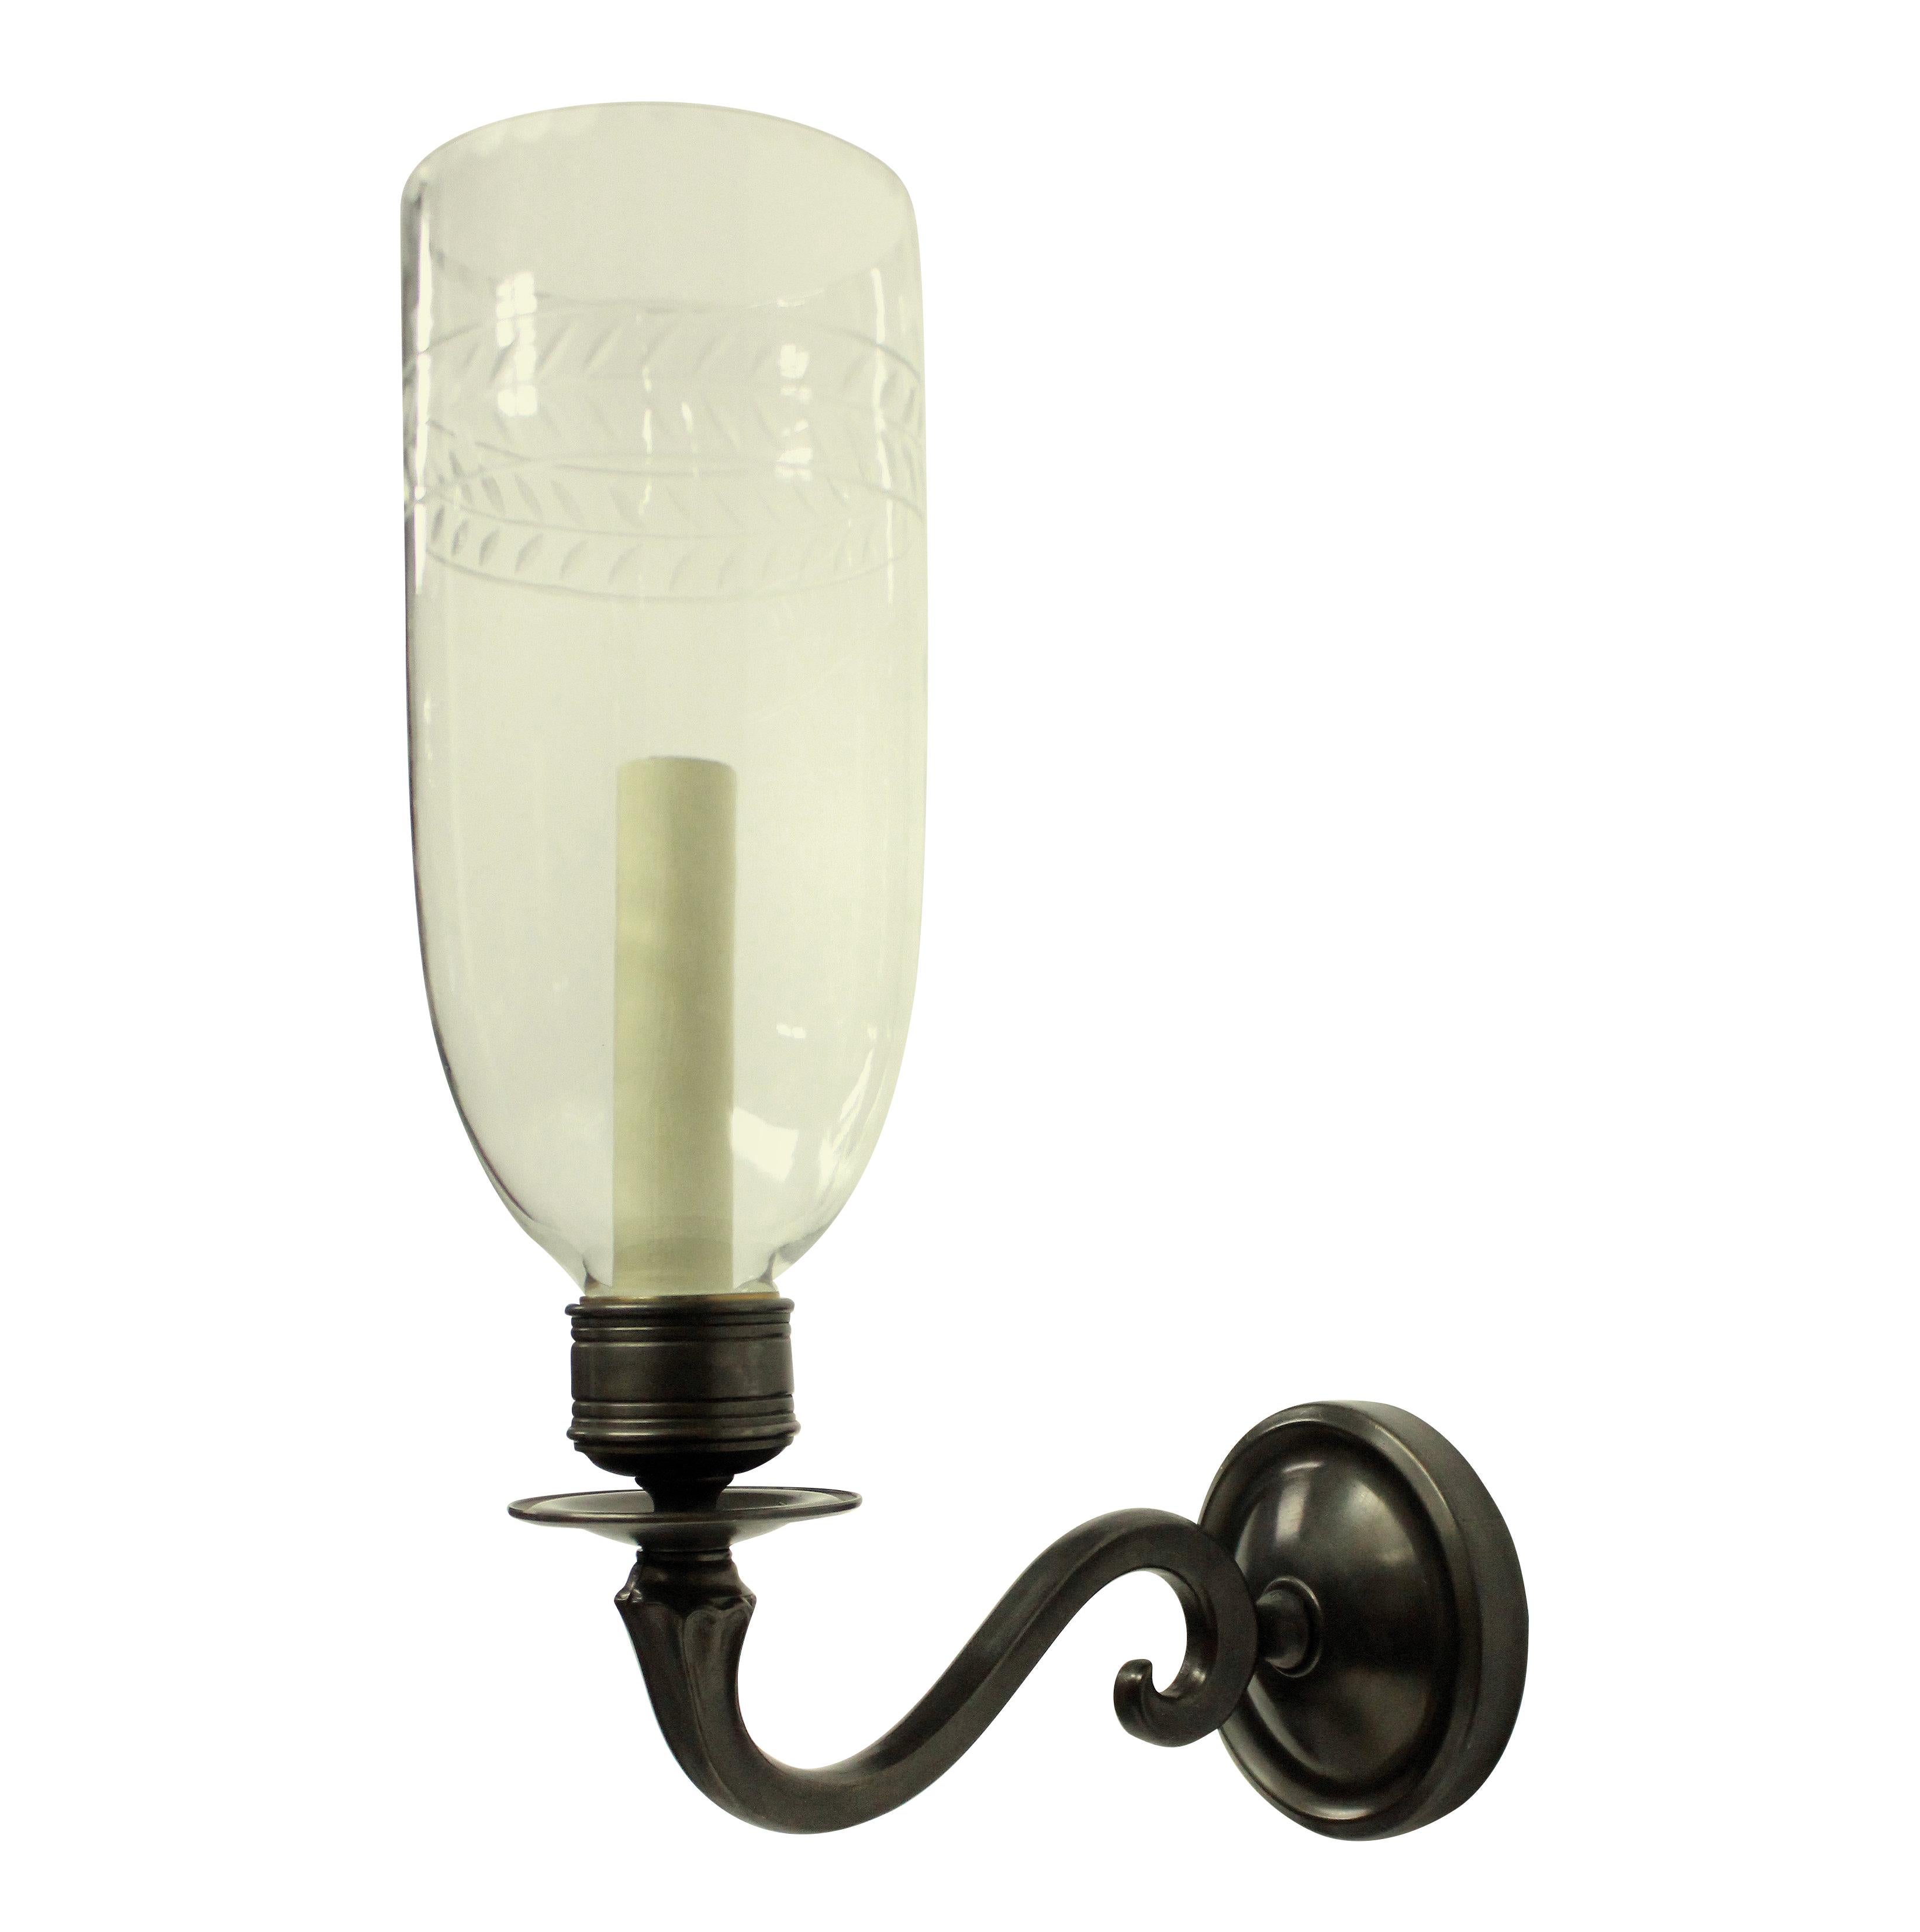 British Pair of Regency Style Wall Sconces with Storm Shades